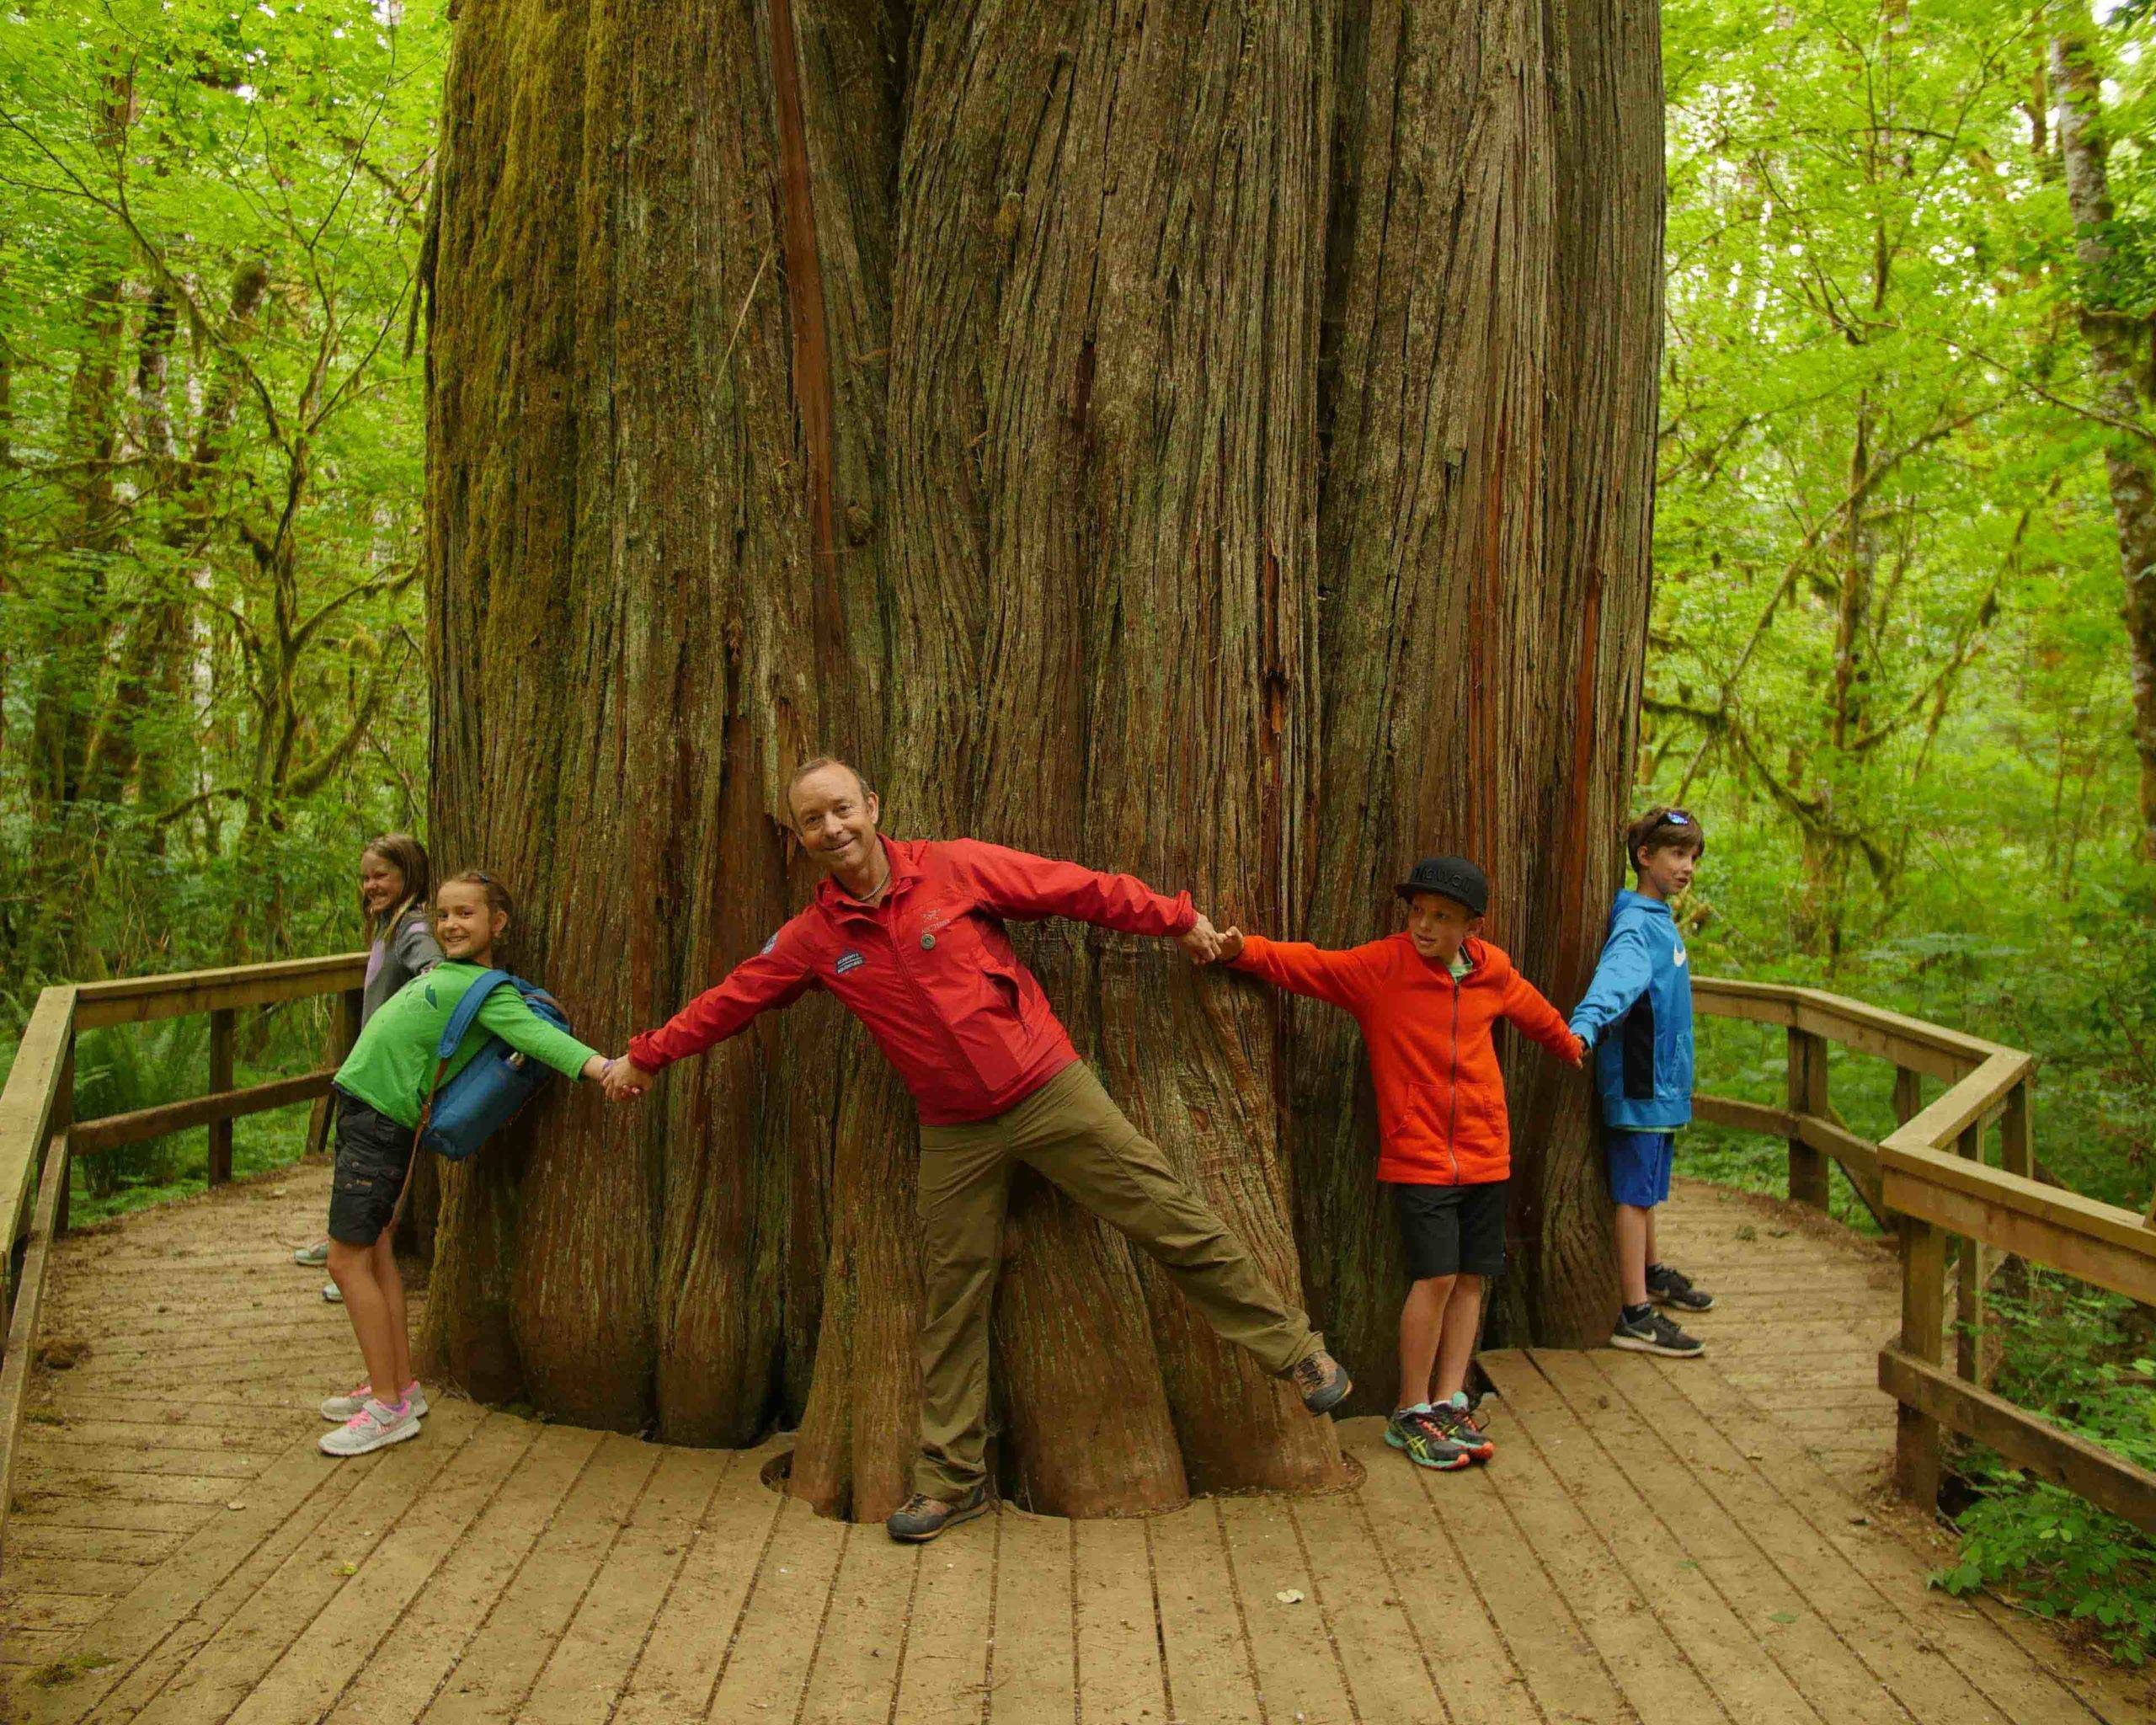 Kids holding hands around large old growth tree